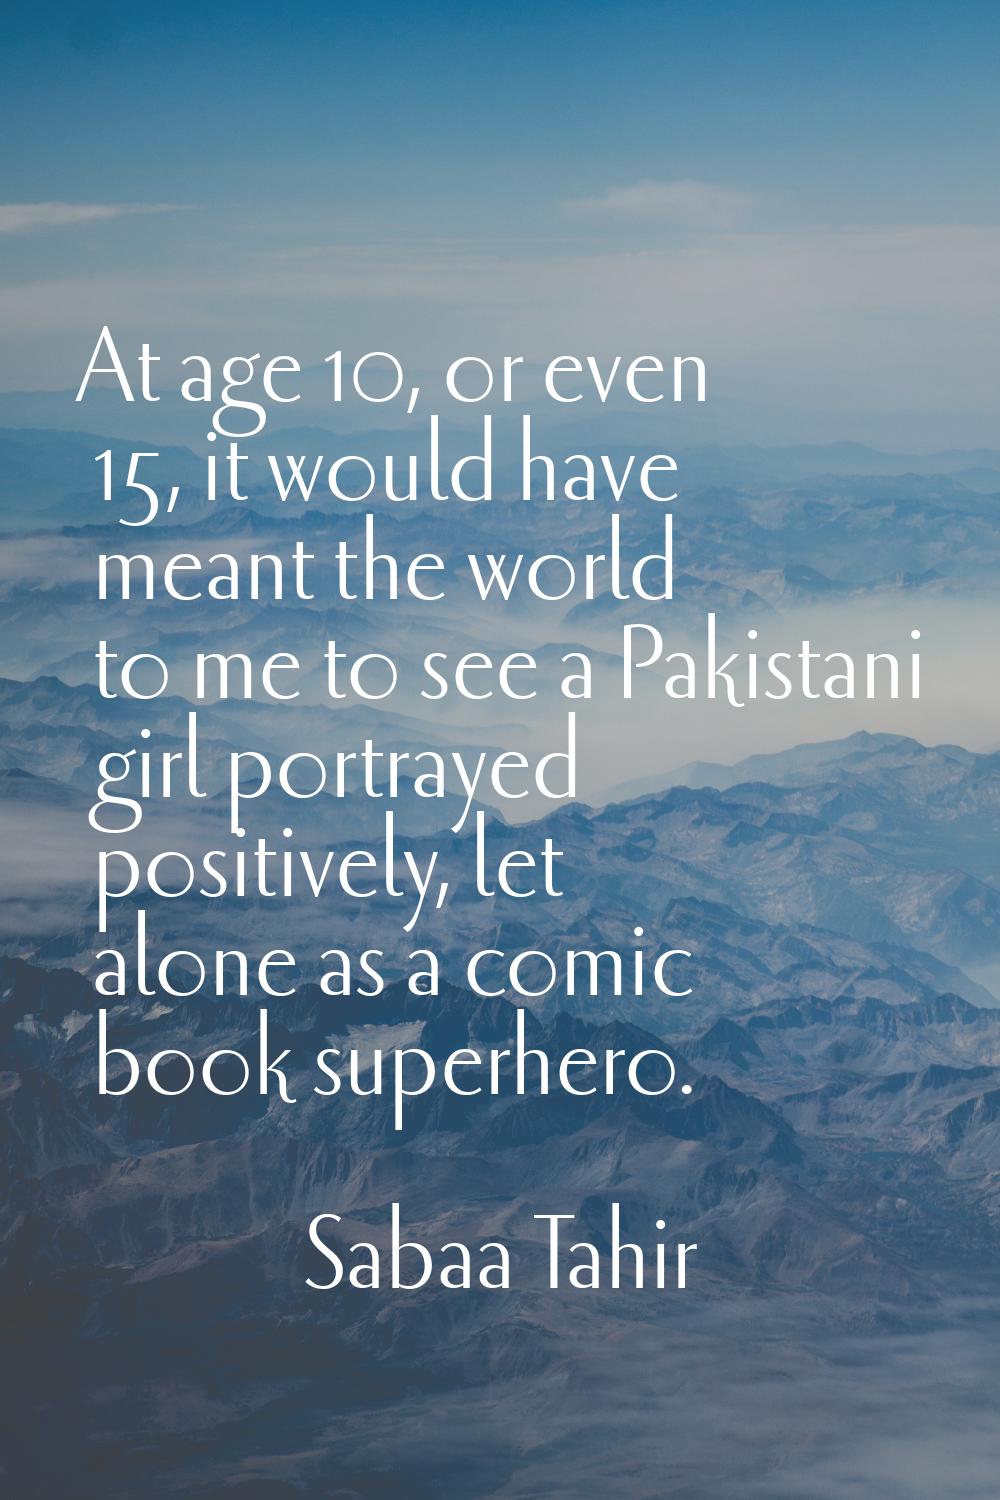 At age 10, or even 15, it would have meant the world to me to see a Pakistani girl portrayed positi